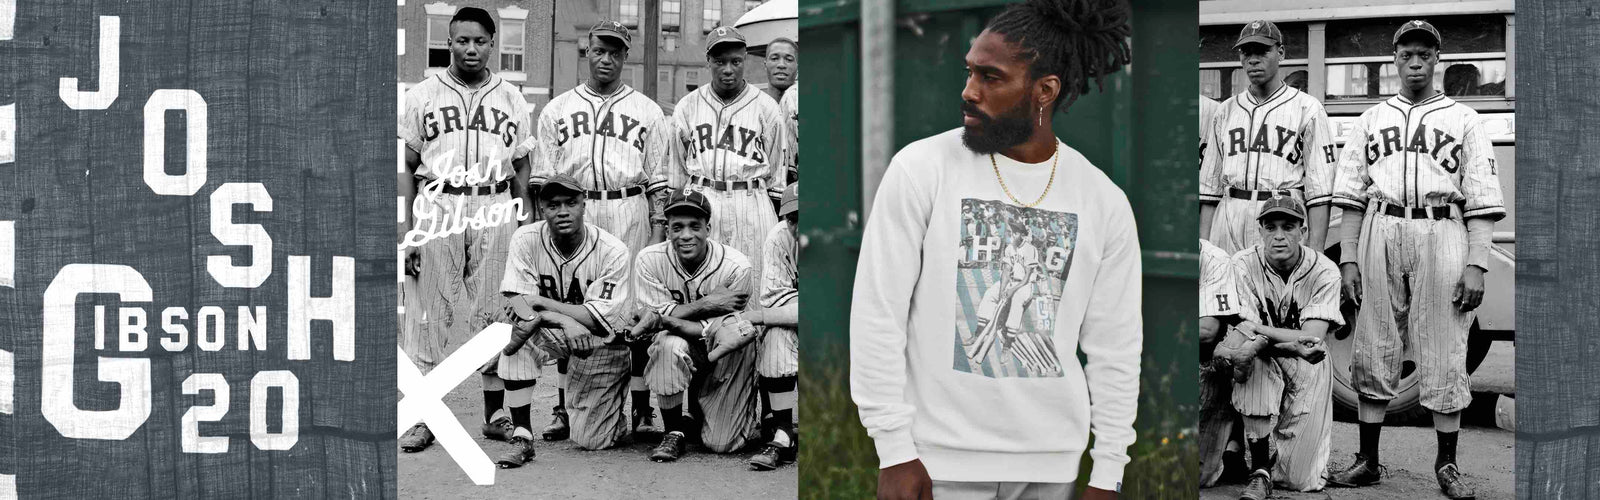 New York Yankees Black Negro League Baseball Fan Apparel and Souvenirs for  sale